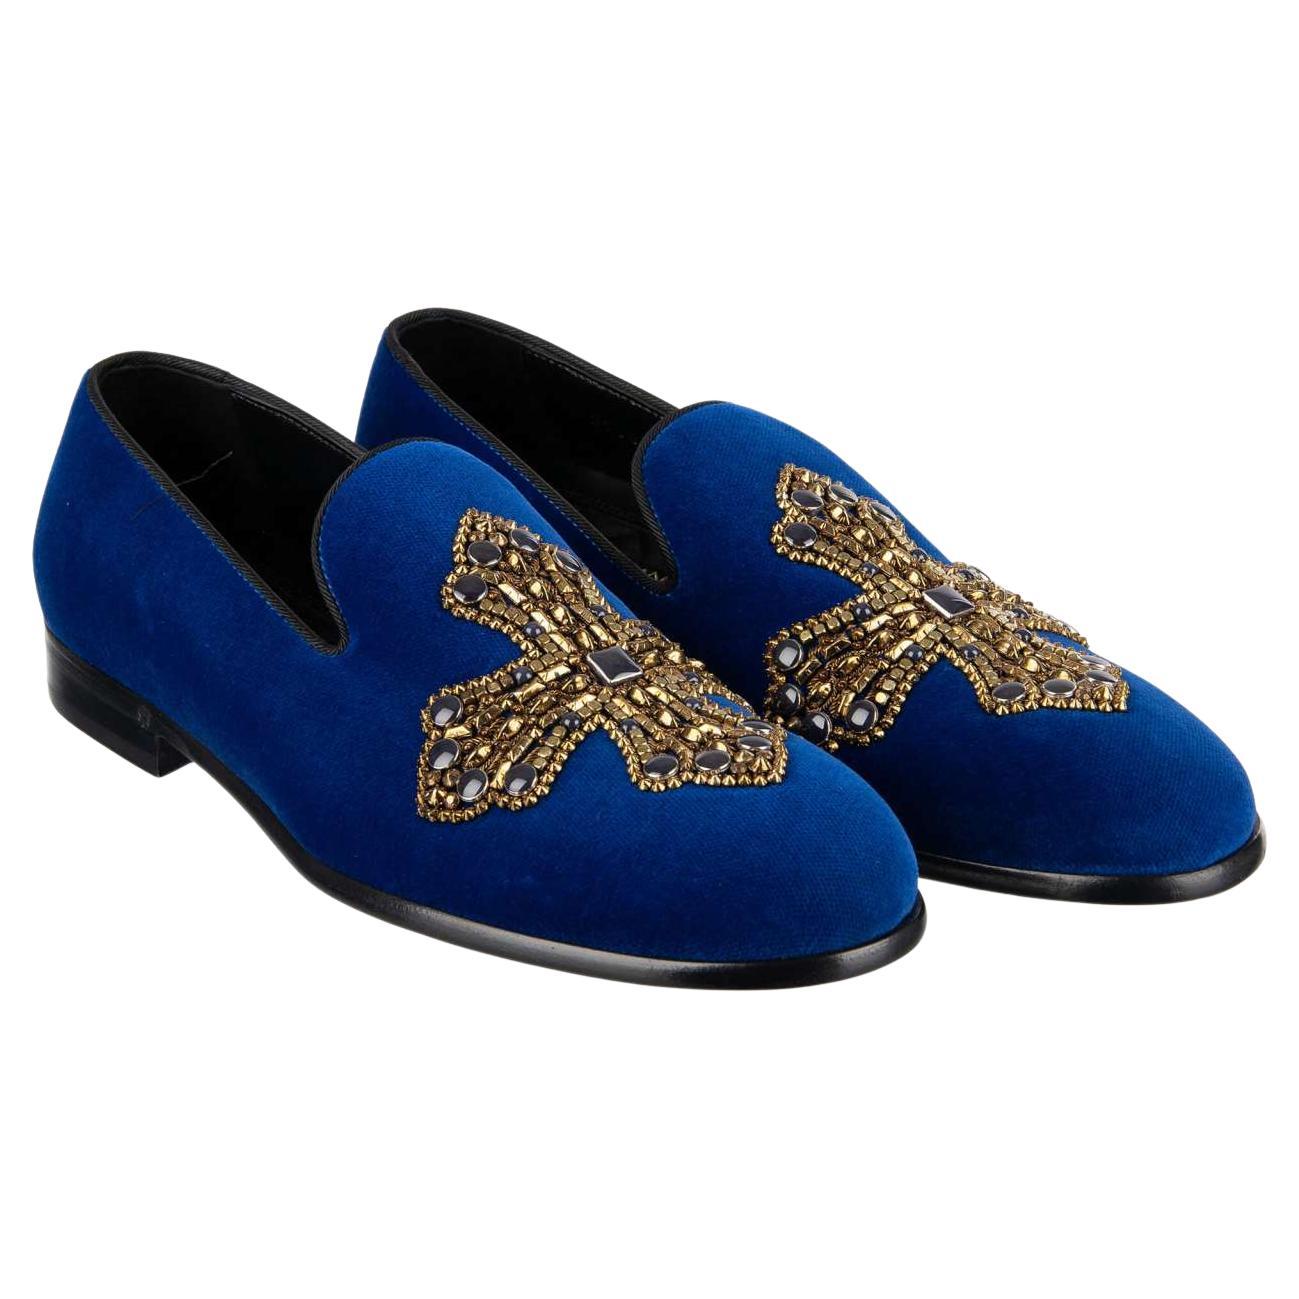 Dolce & Gabbana - Cross Embroidered Loafer MILANO Blue EUR 44 For Sale